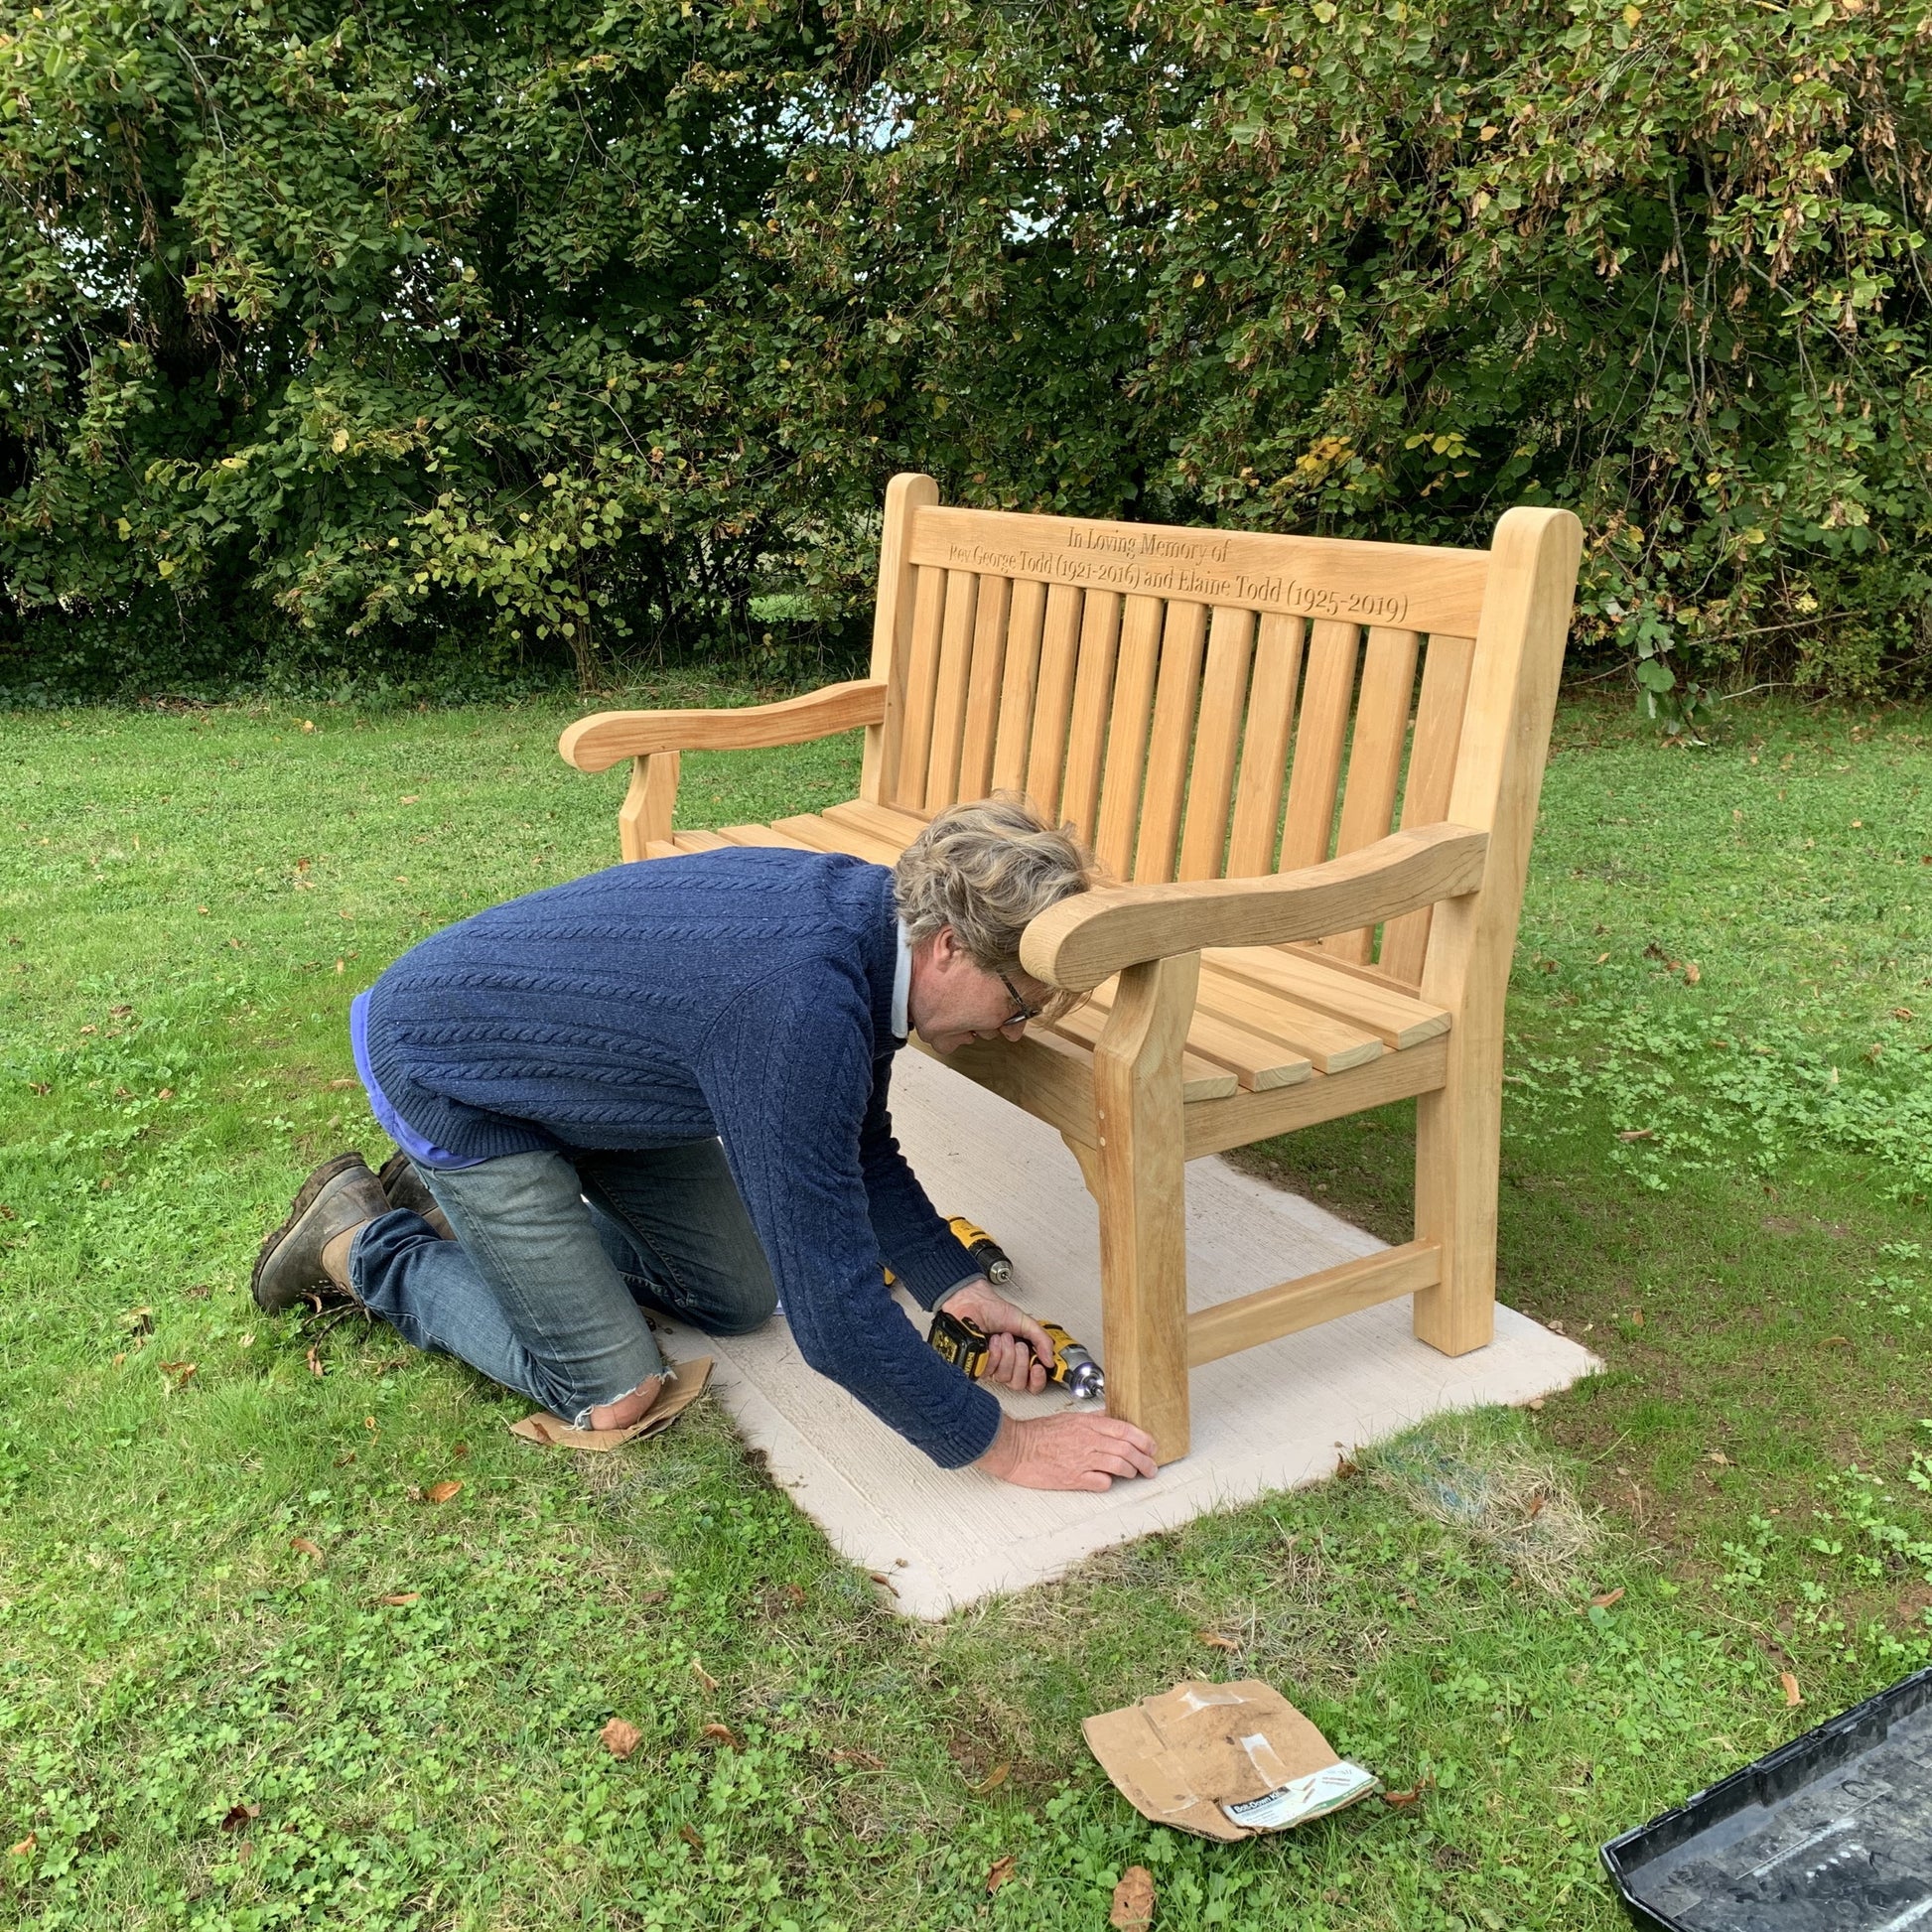 Installing a memorial bench with anchors to concrete